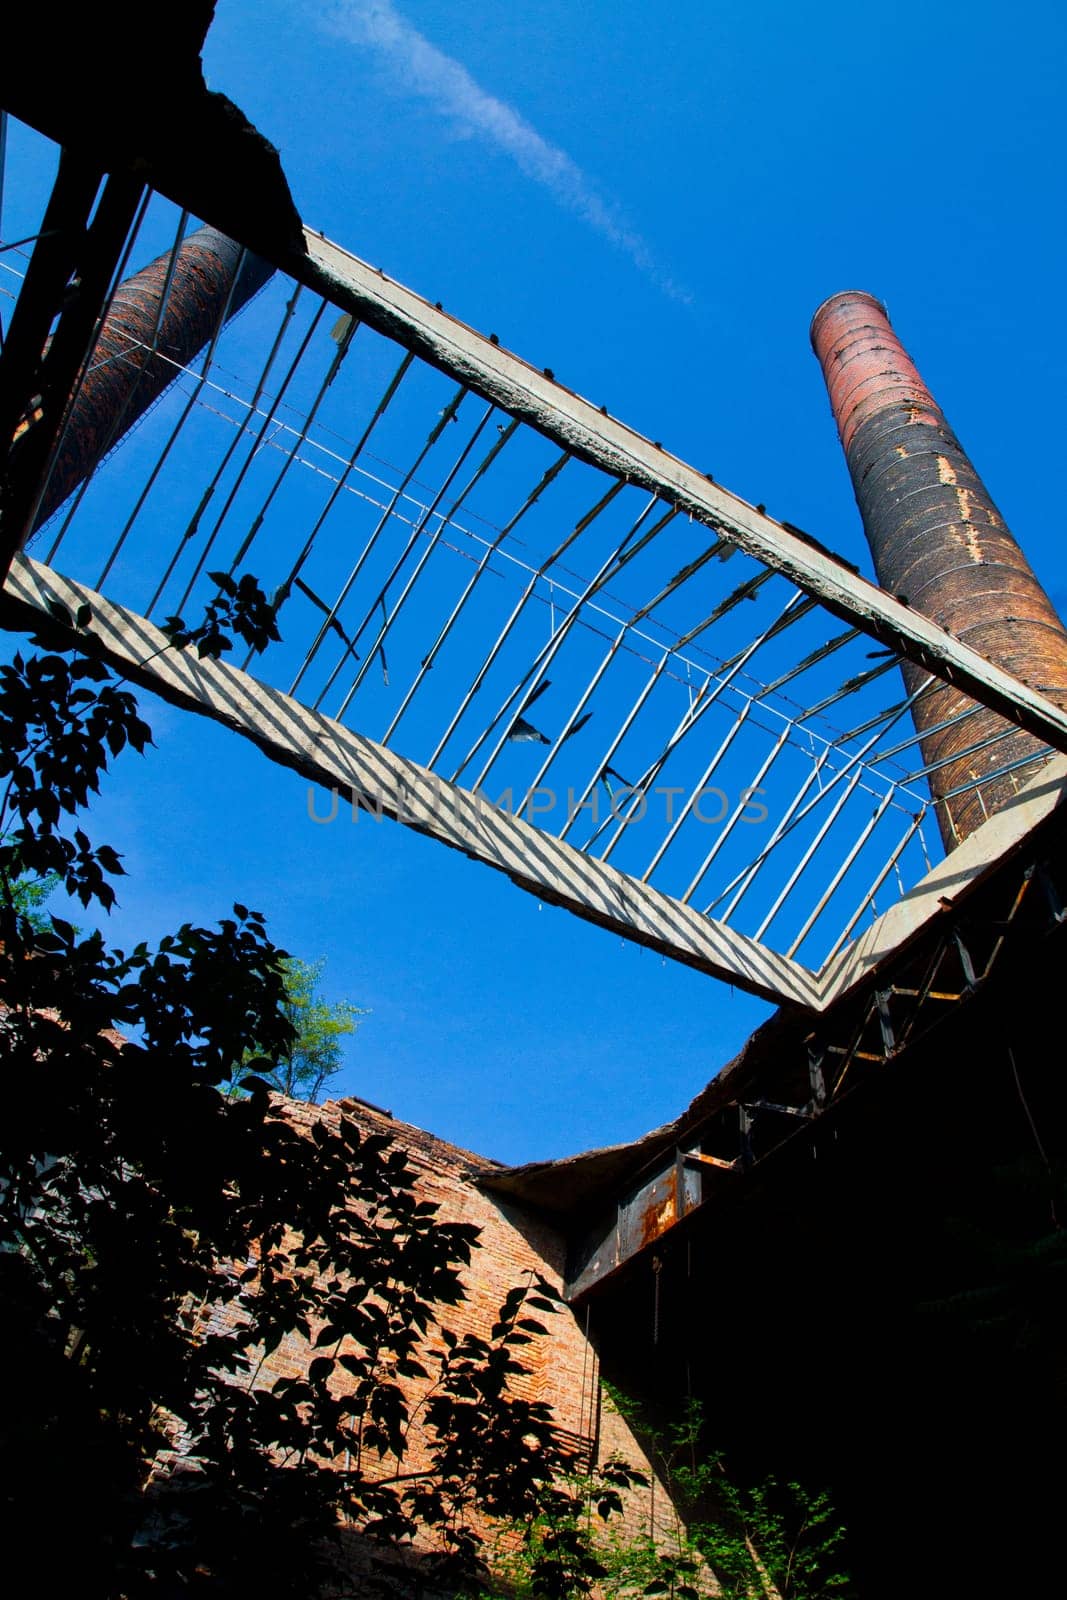 Reclaimed by Nature: Rustic Industrial Remains Under Clear Blue Sky by njproductions